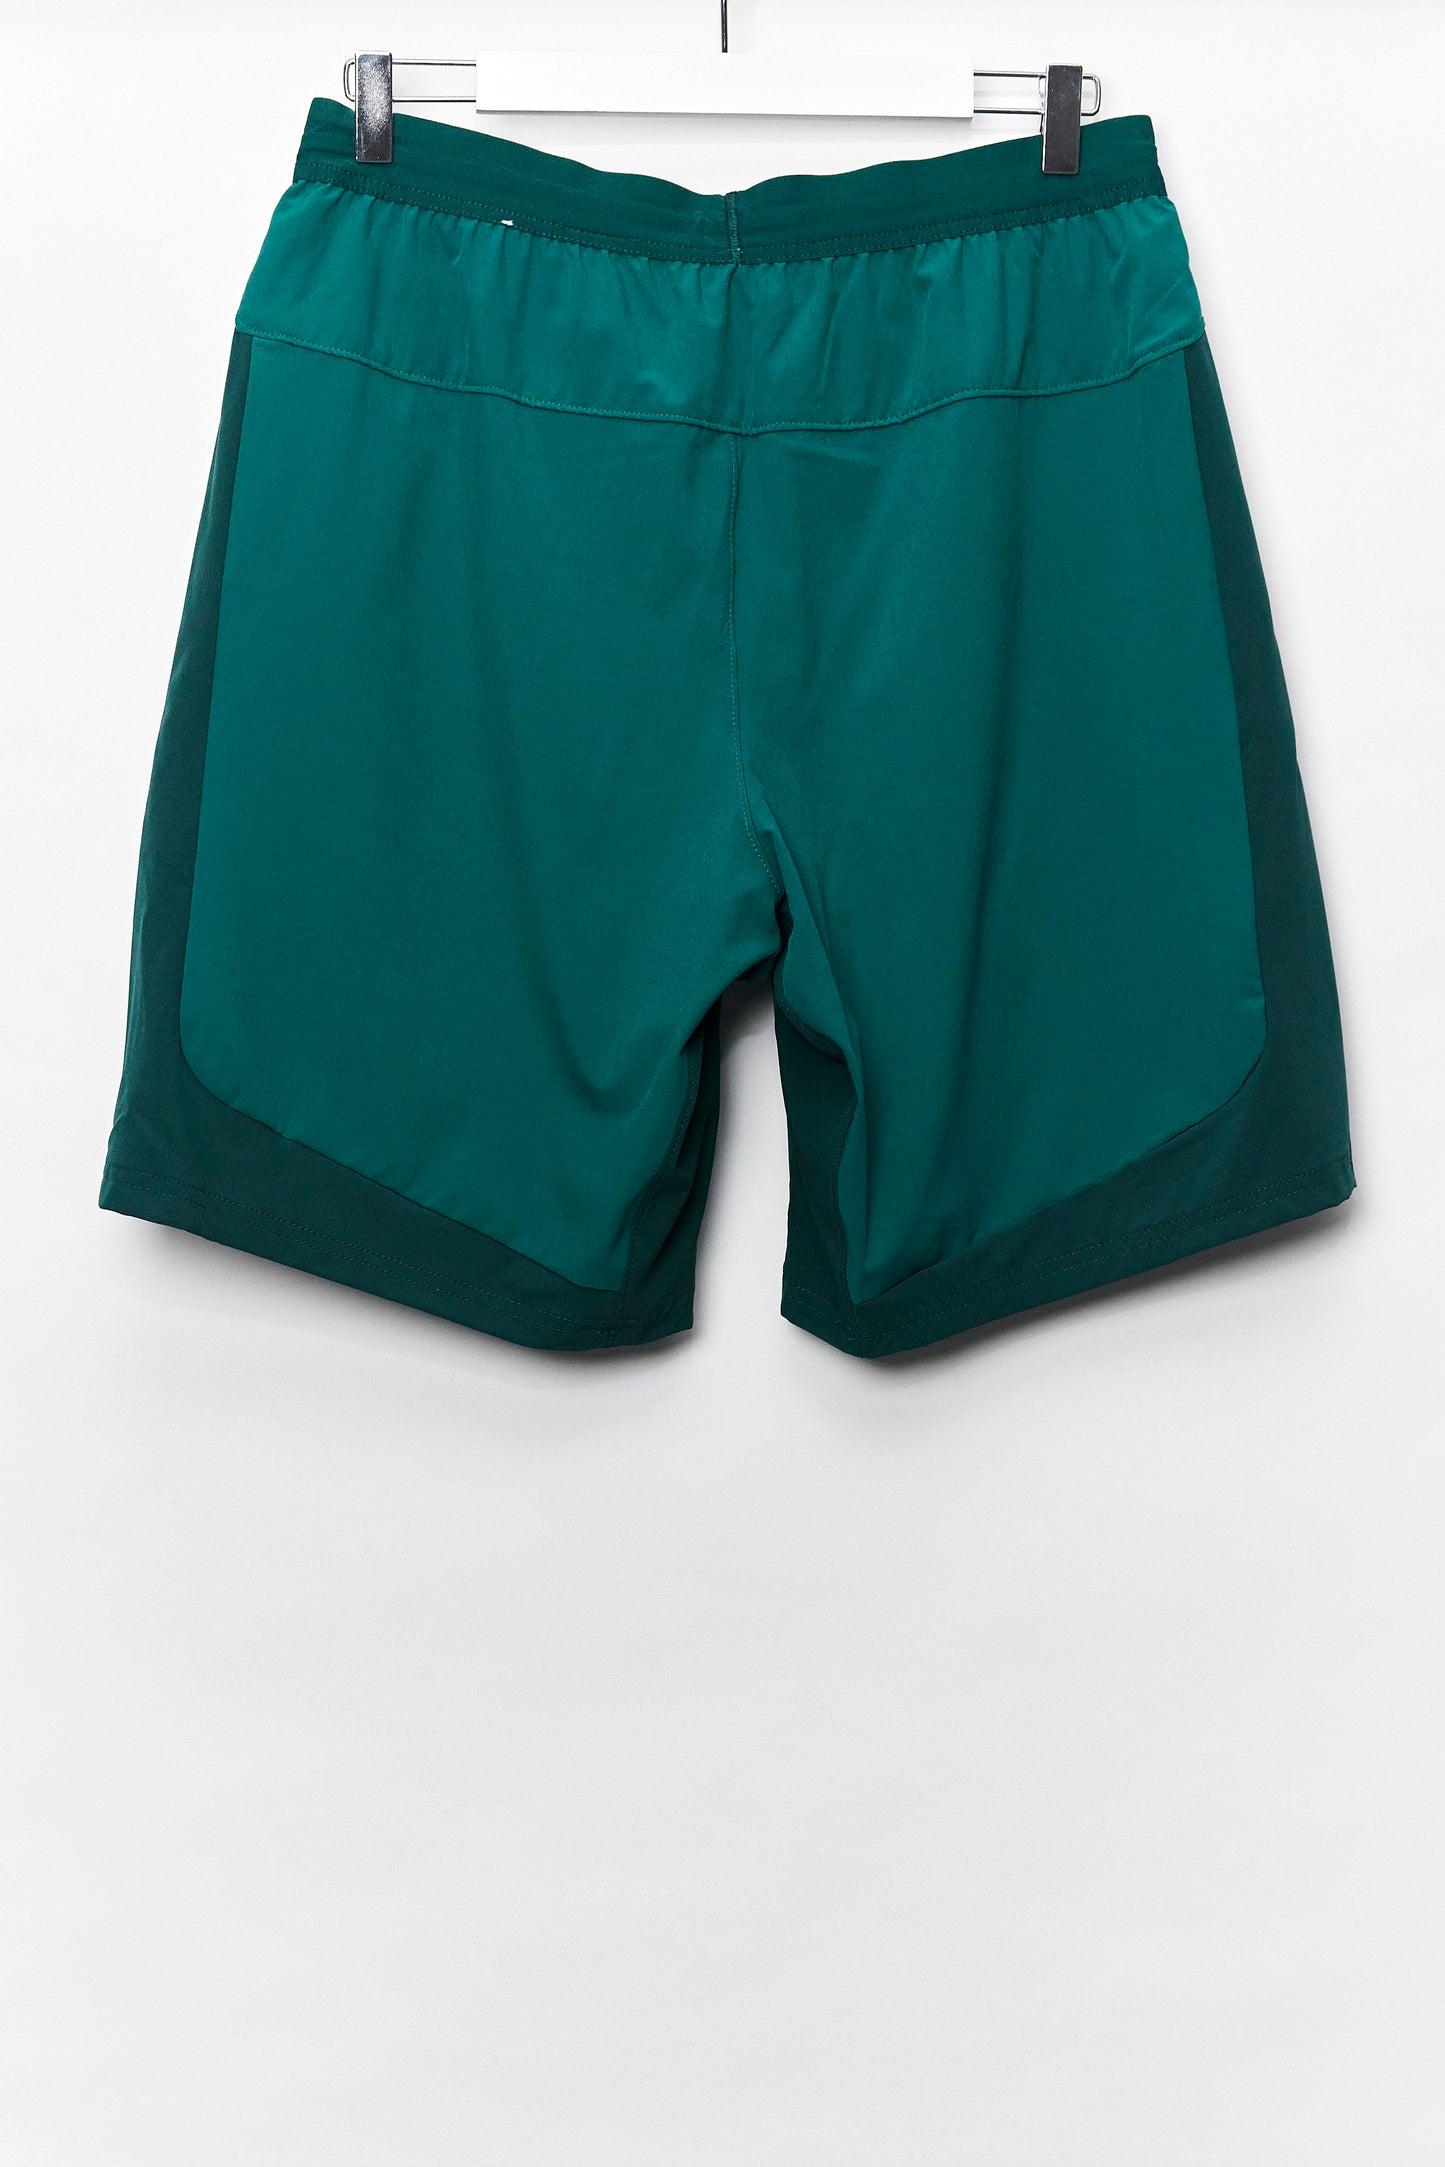 Mens H&M Move Green Sport Short size Small